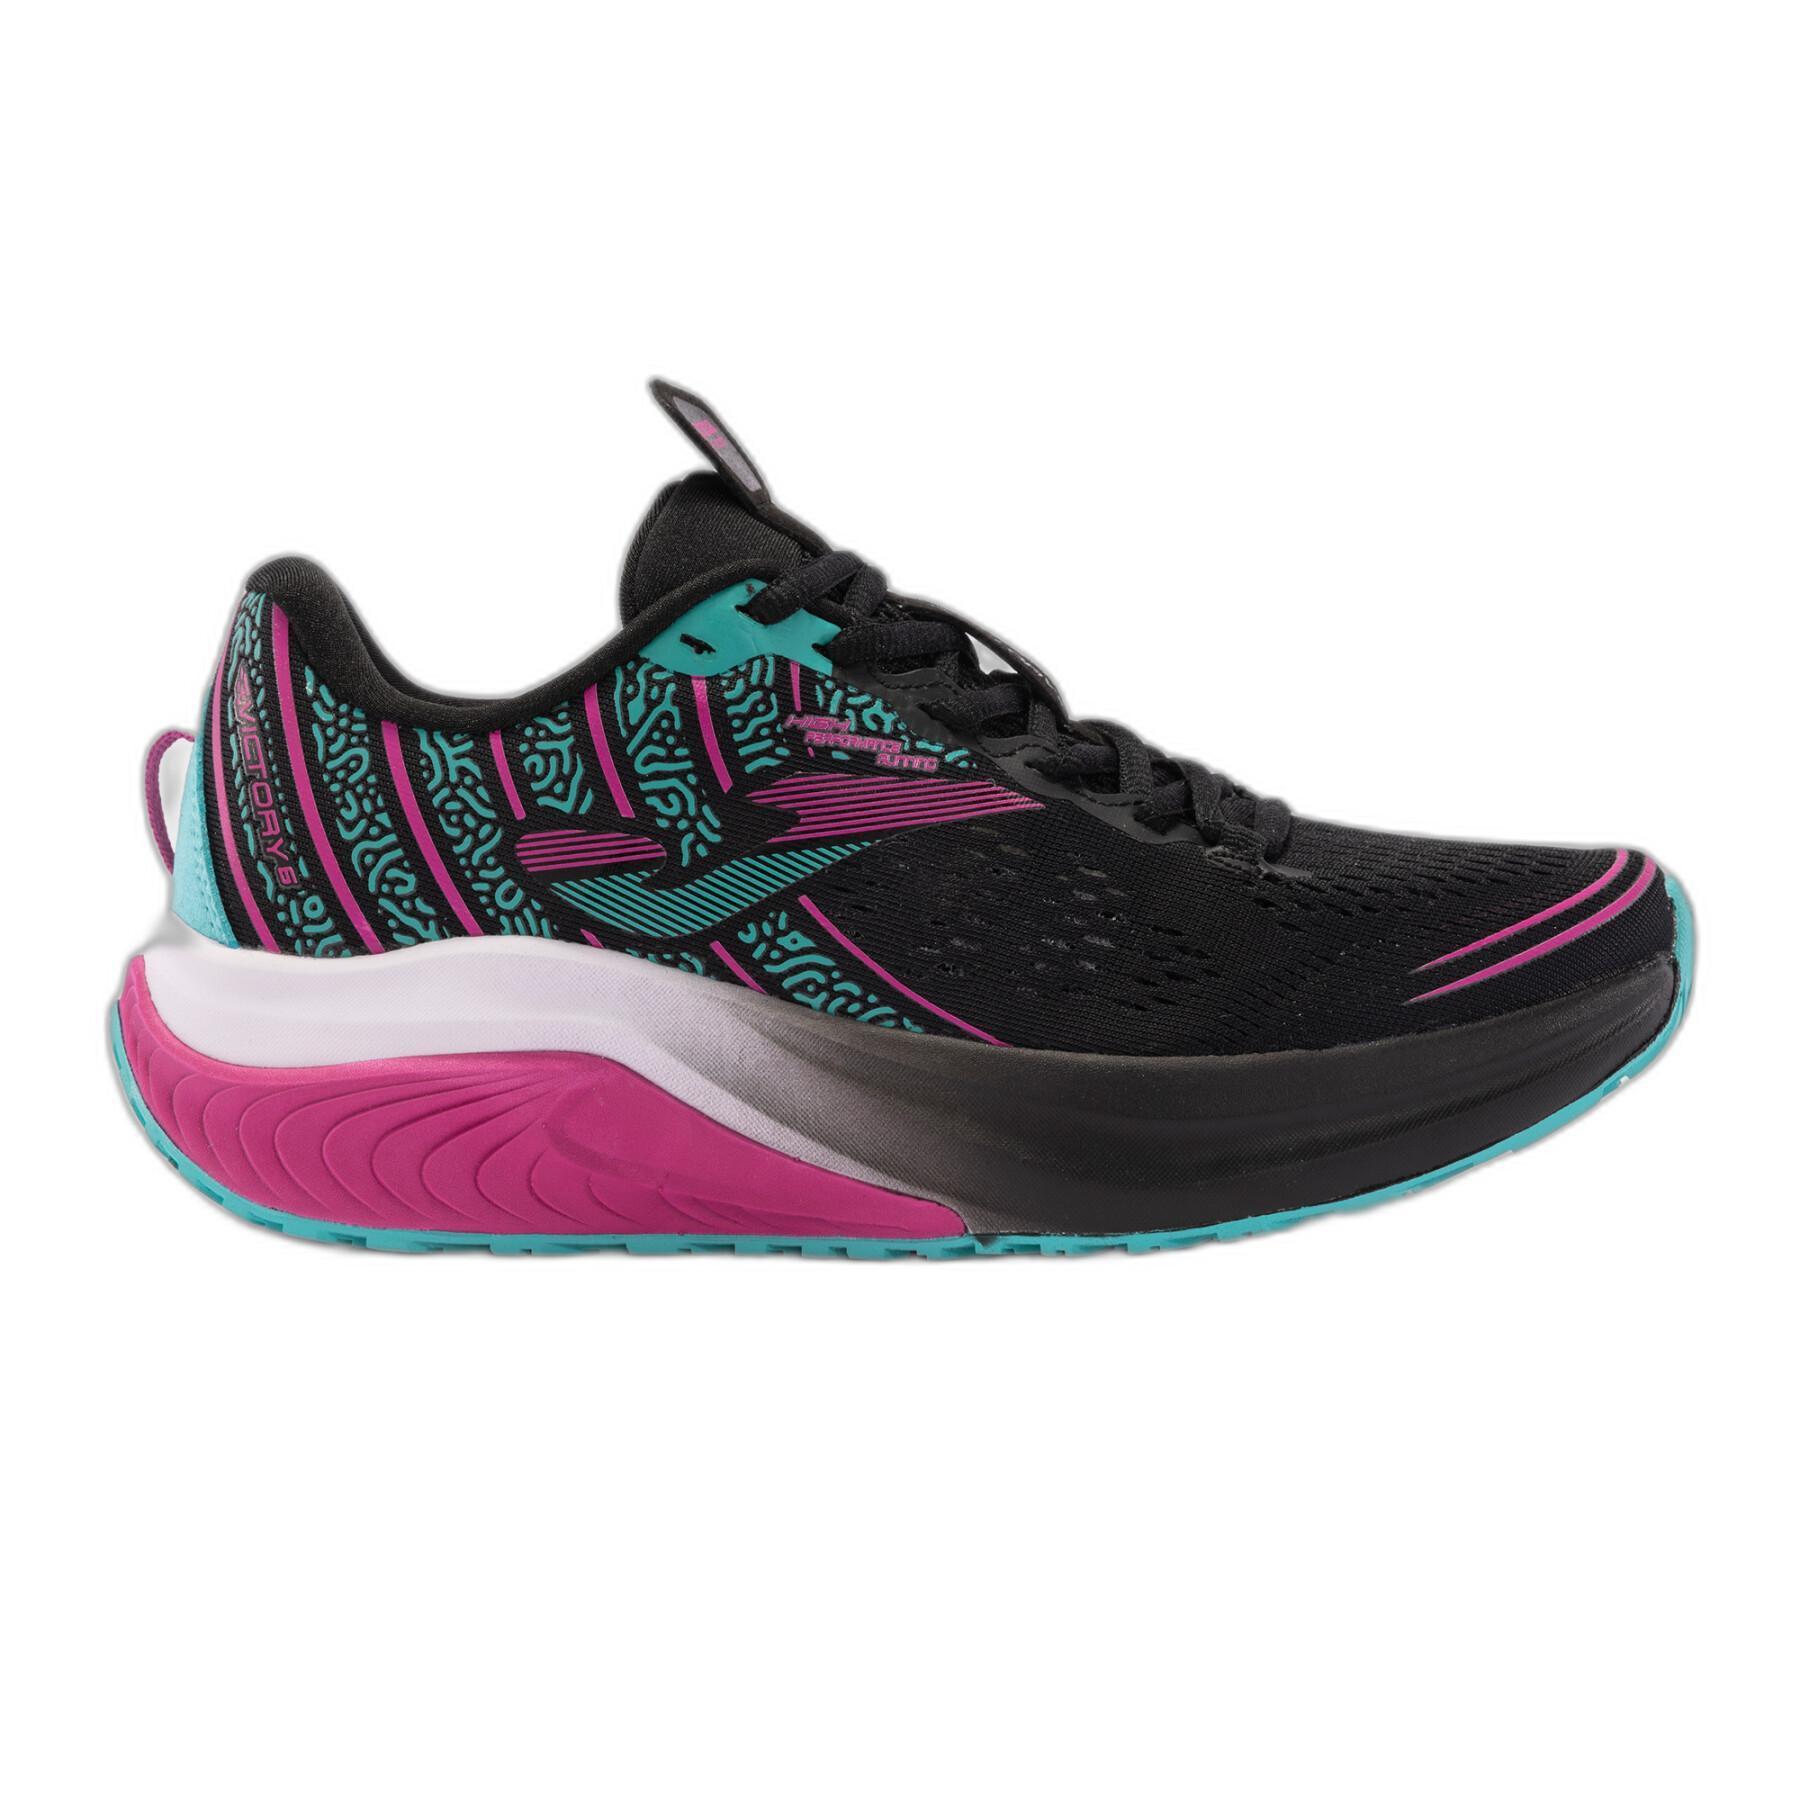 Chaussures de running femme Joma Victory 2401